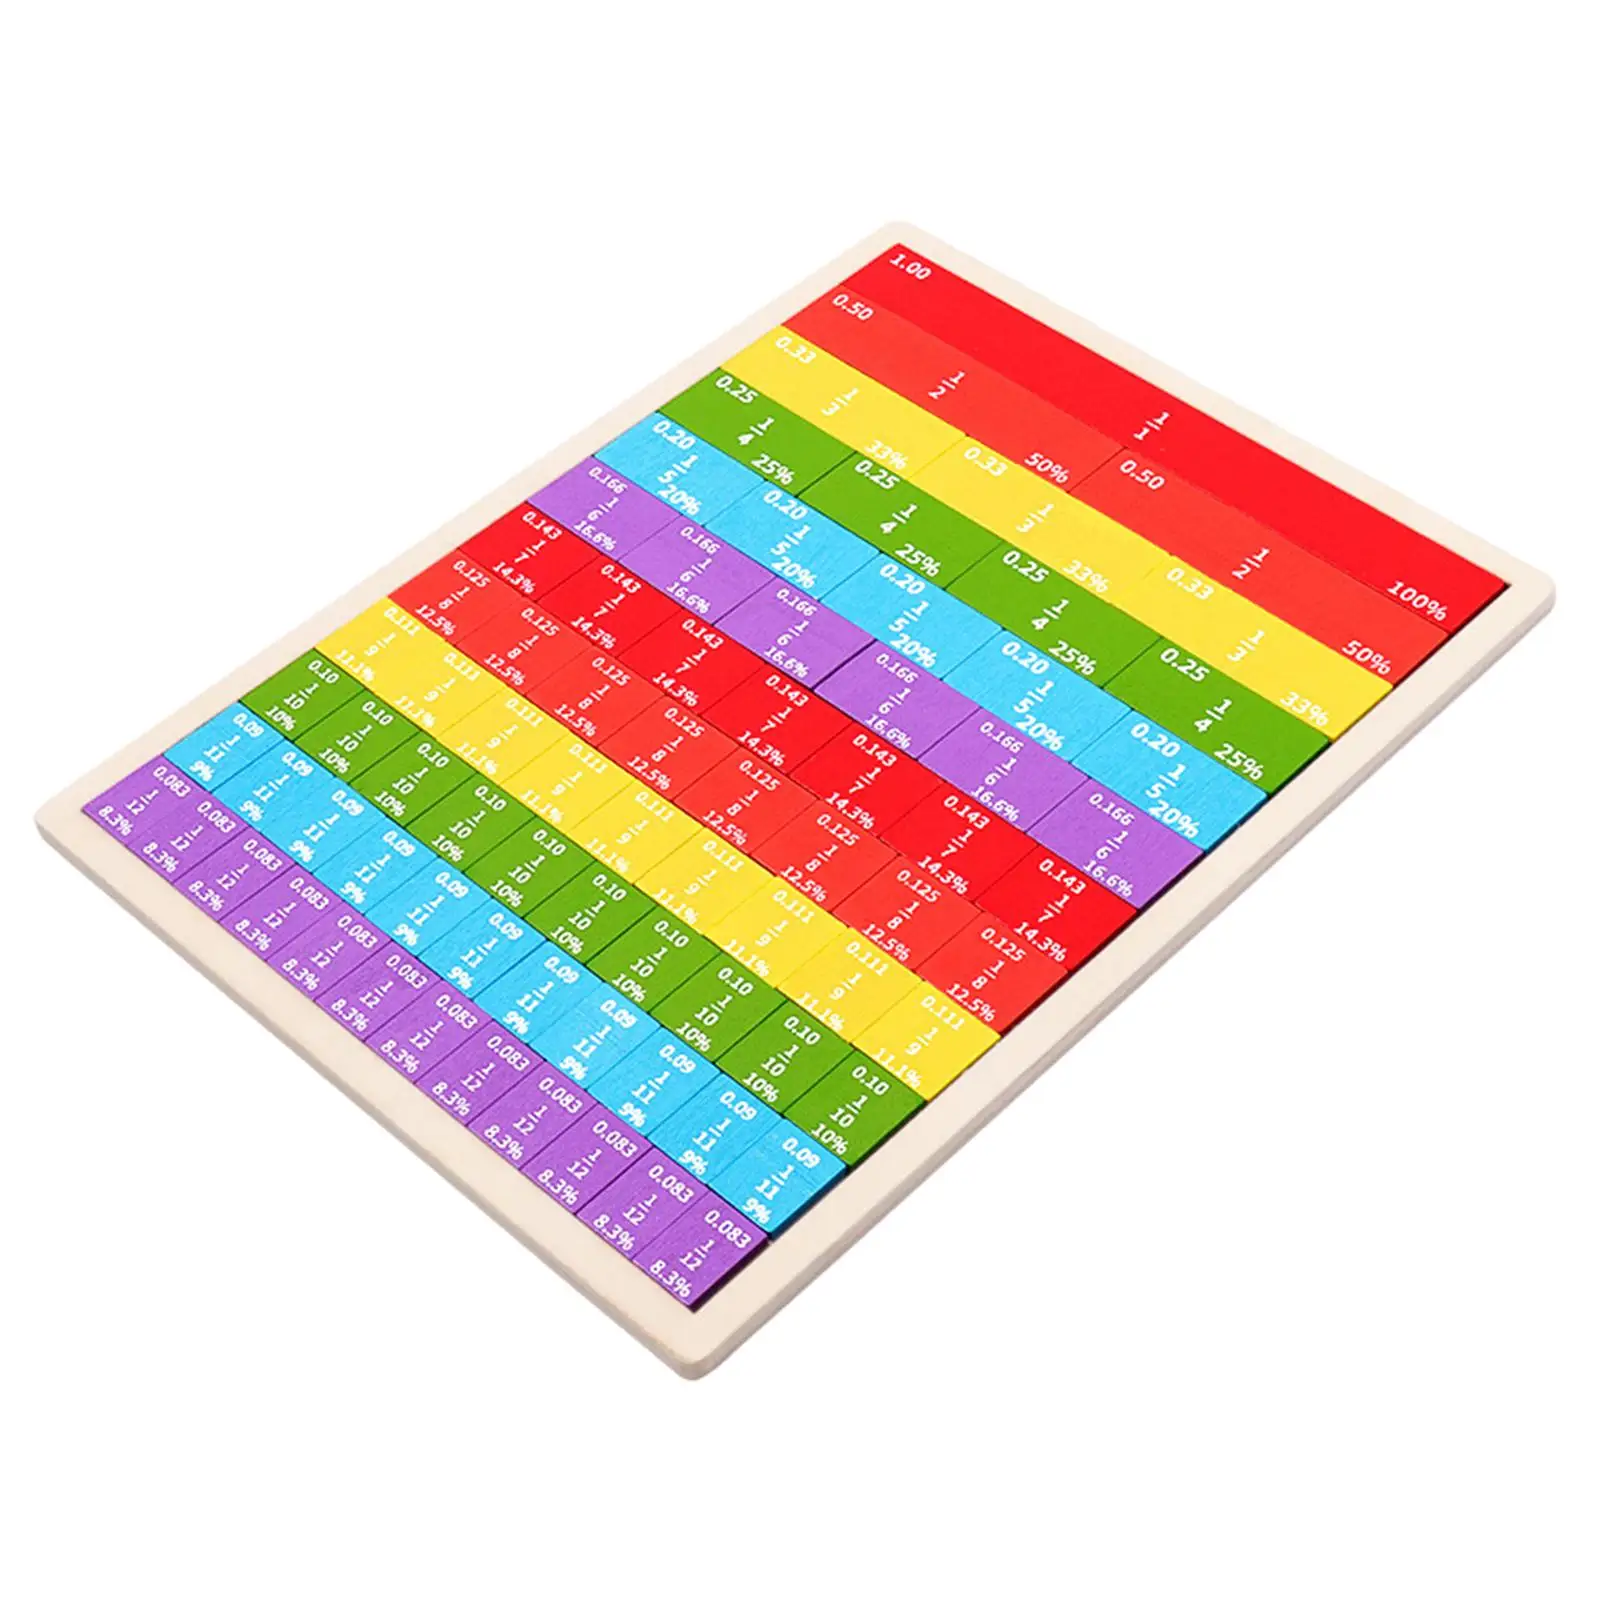 Fraction Tiles Visual Aid Teach Fractions, Decimals and Percent Equivalents for Homeschool Birthday Gift Kids Teacher Elementary